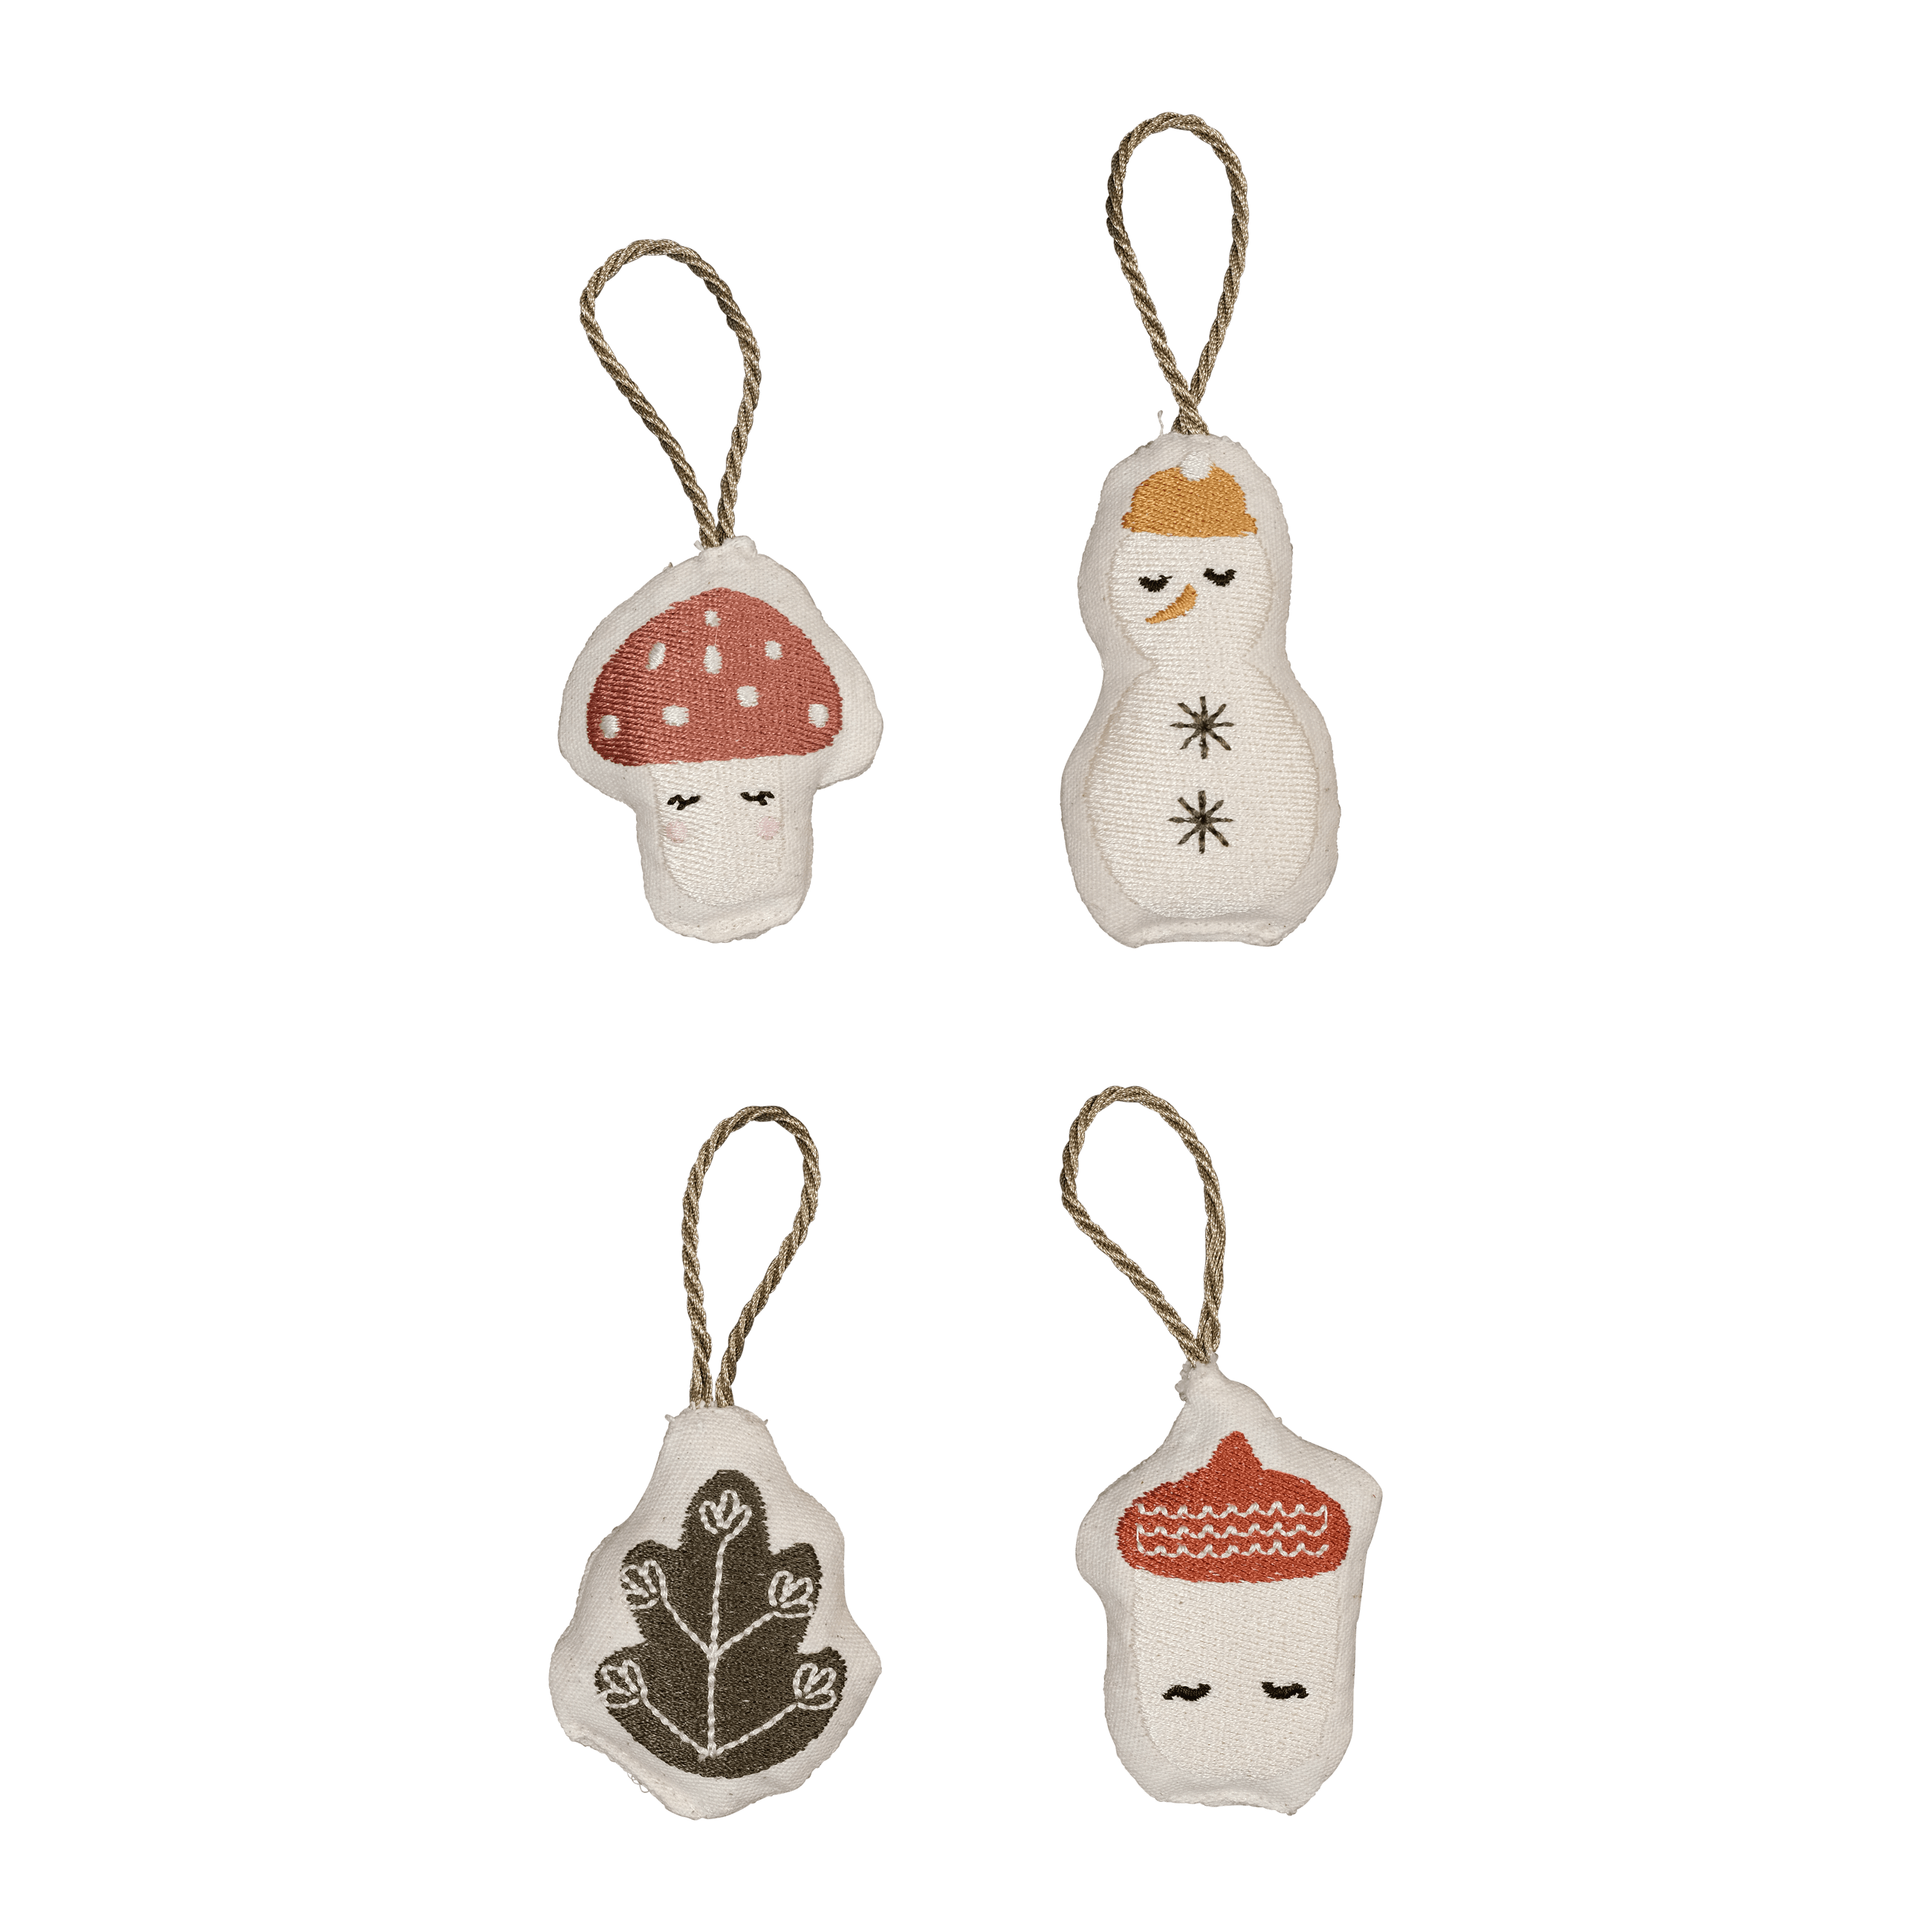 Embroidered Ornament Set of 4